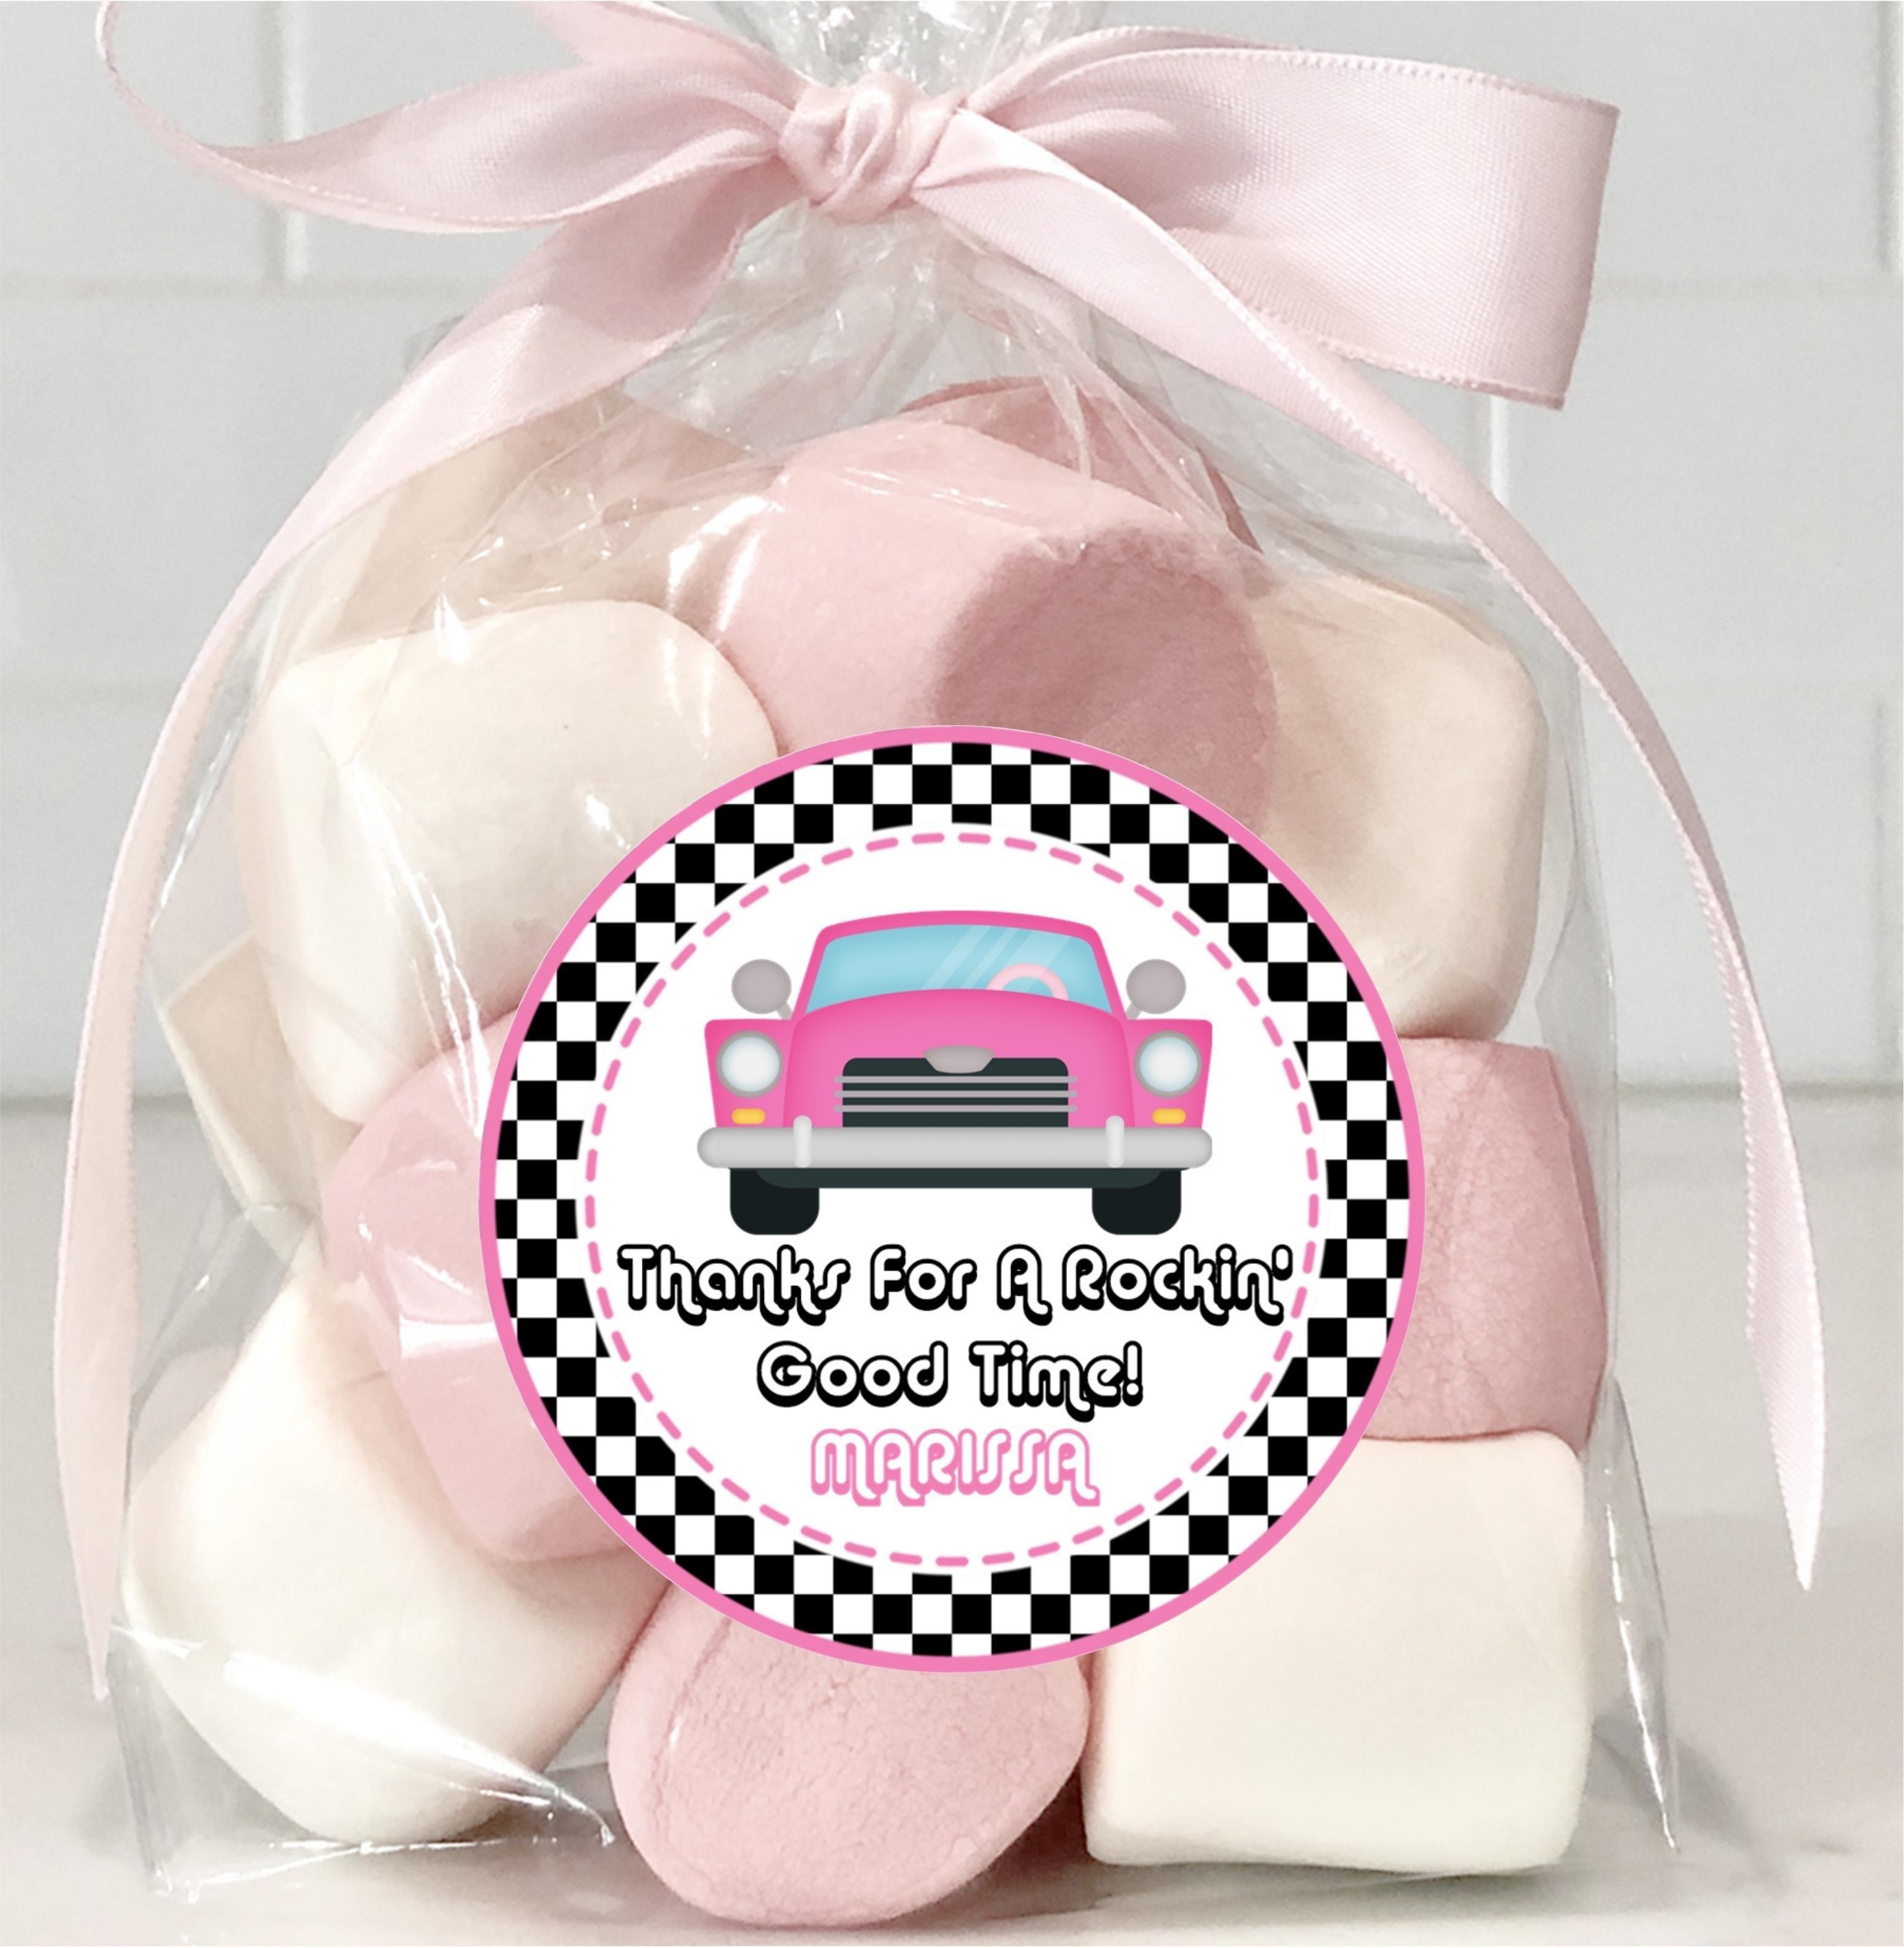 1950's Sock Hop Antique Car Birthday Party Stickers Or Favor Tags